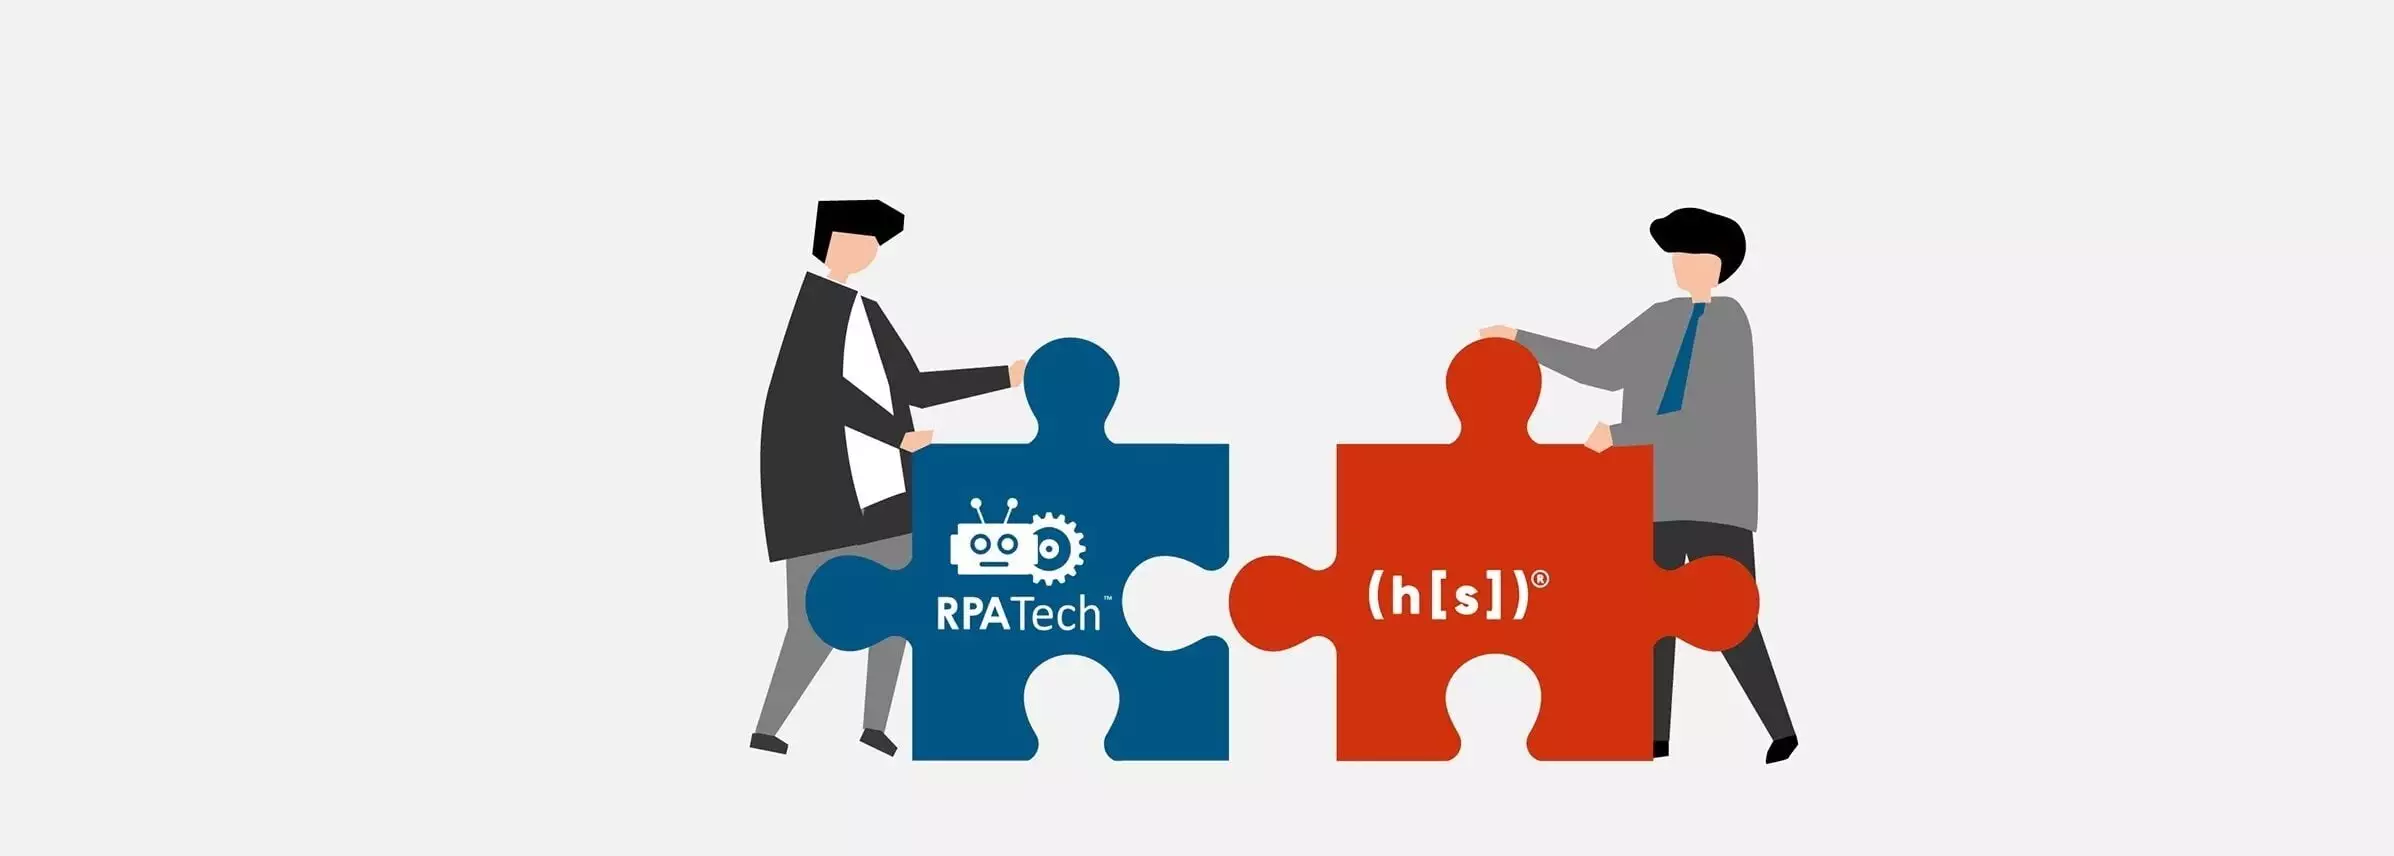 RPATech Announces Partnership with Hyperscience to Leverage Intelligent Document Processing for Accelerated Automation